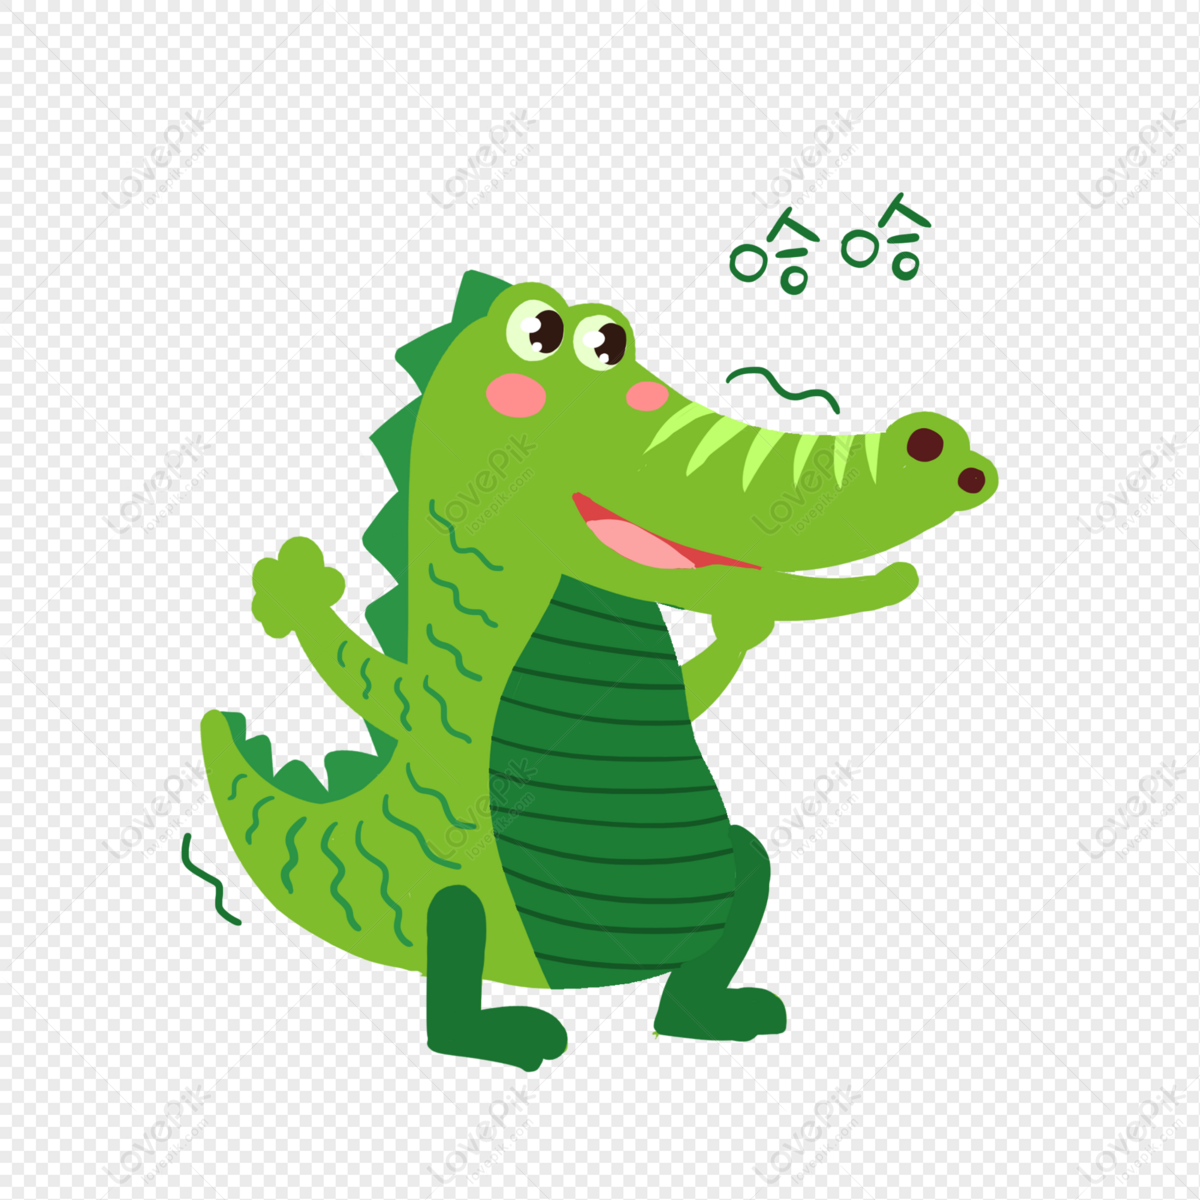 Laughing Crocodile PNG Picture And Clipart Image For Free Download -  Lovepik | 401550485